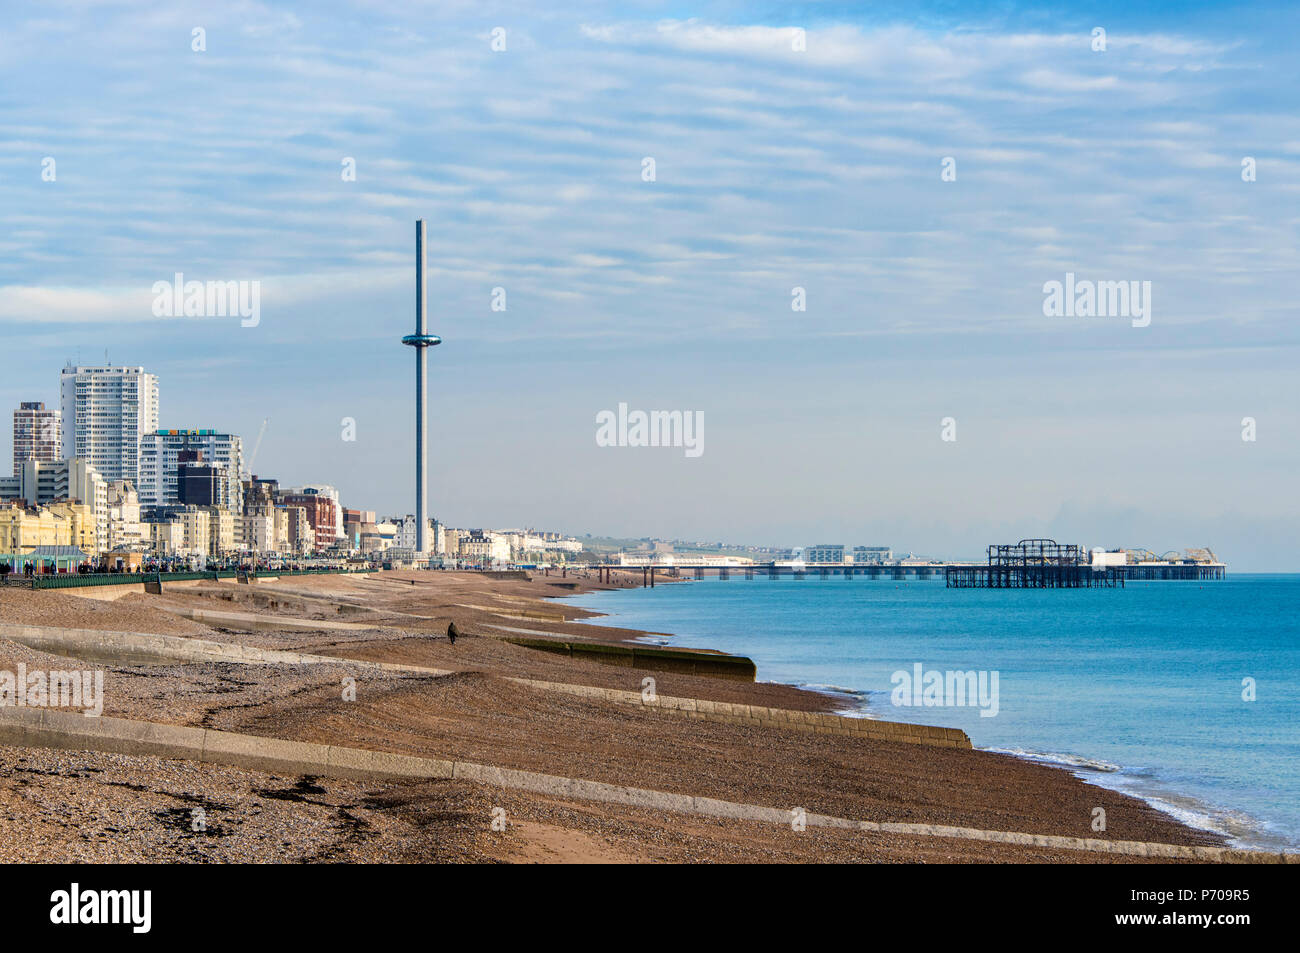 Brighton, traditional seaside resort in East Sussex, England Stock Photo